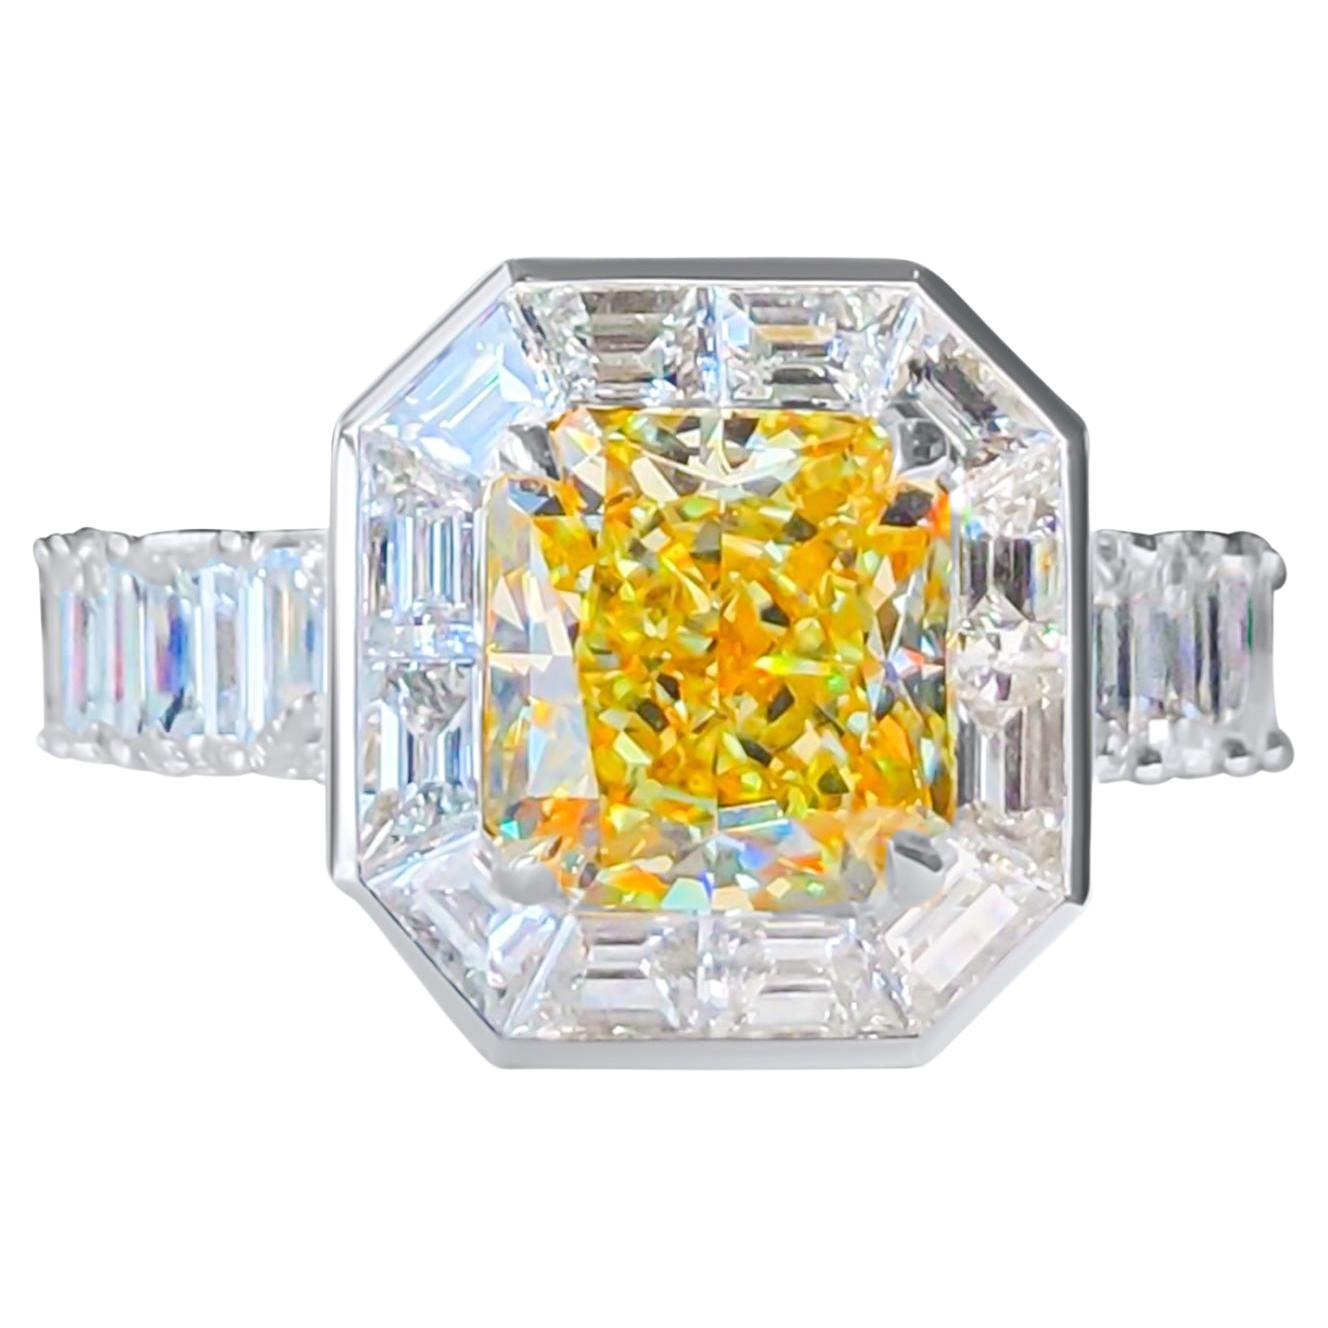 2.19ct Fancy Intense Yellow Diamond Engagement Ring GIA For Sale